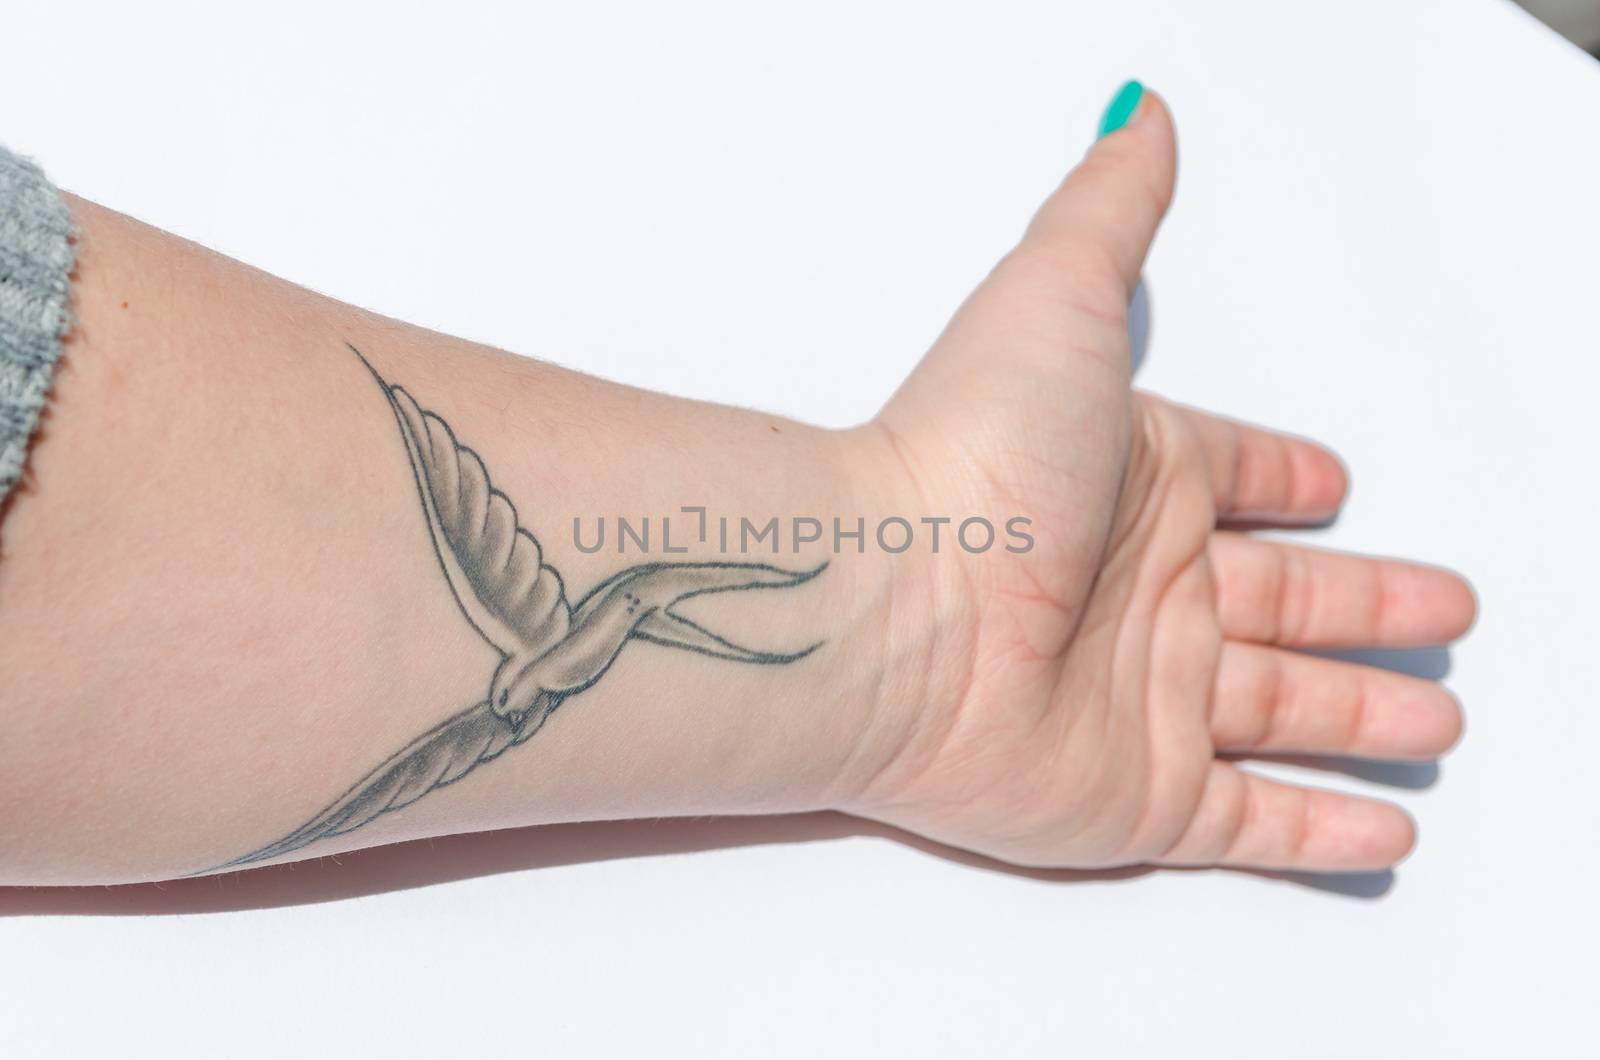 A tattoo of a bird, here it is a swallow on a forearm.